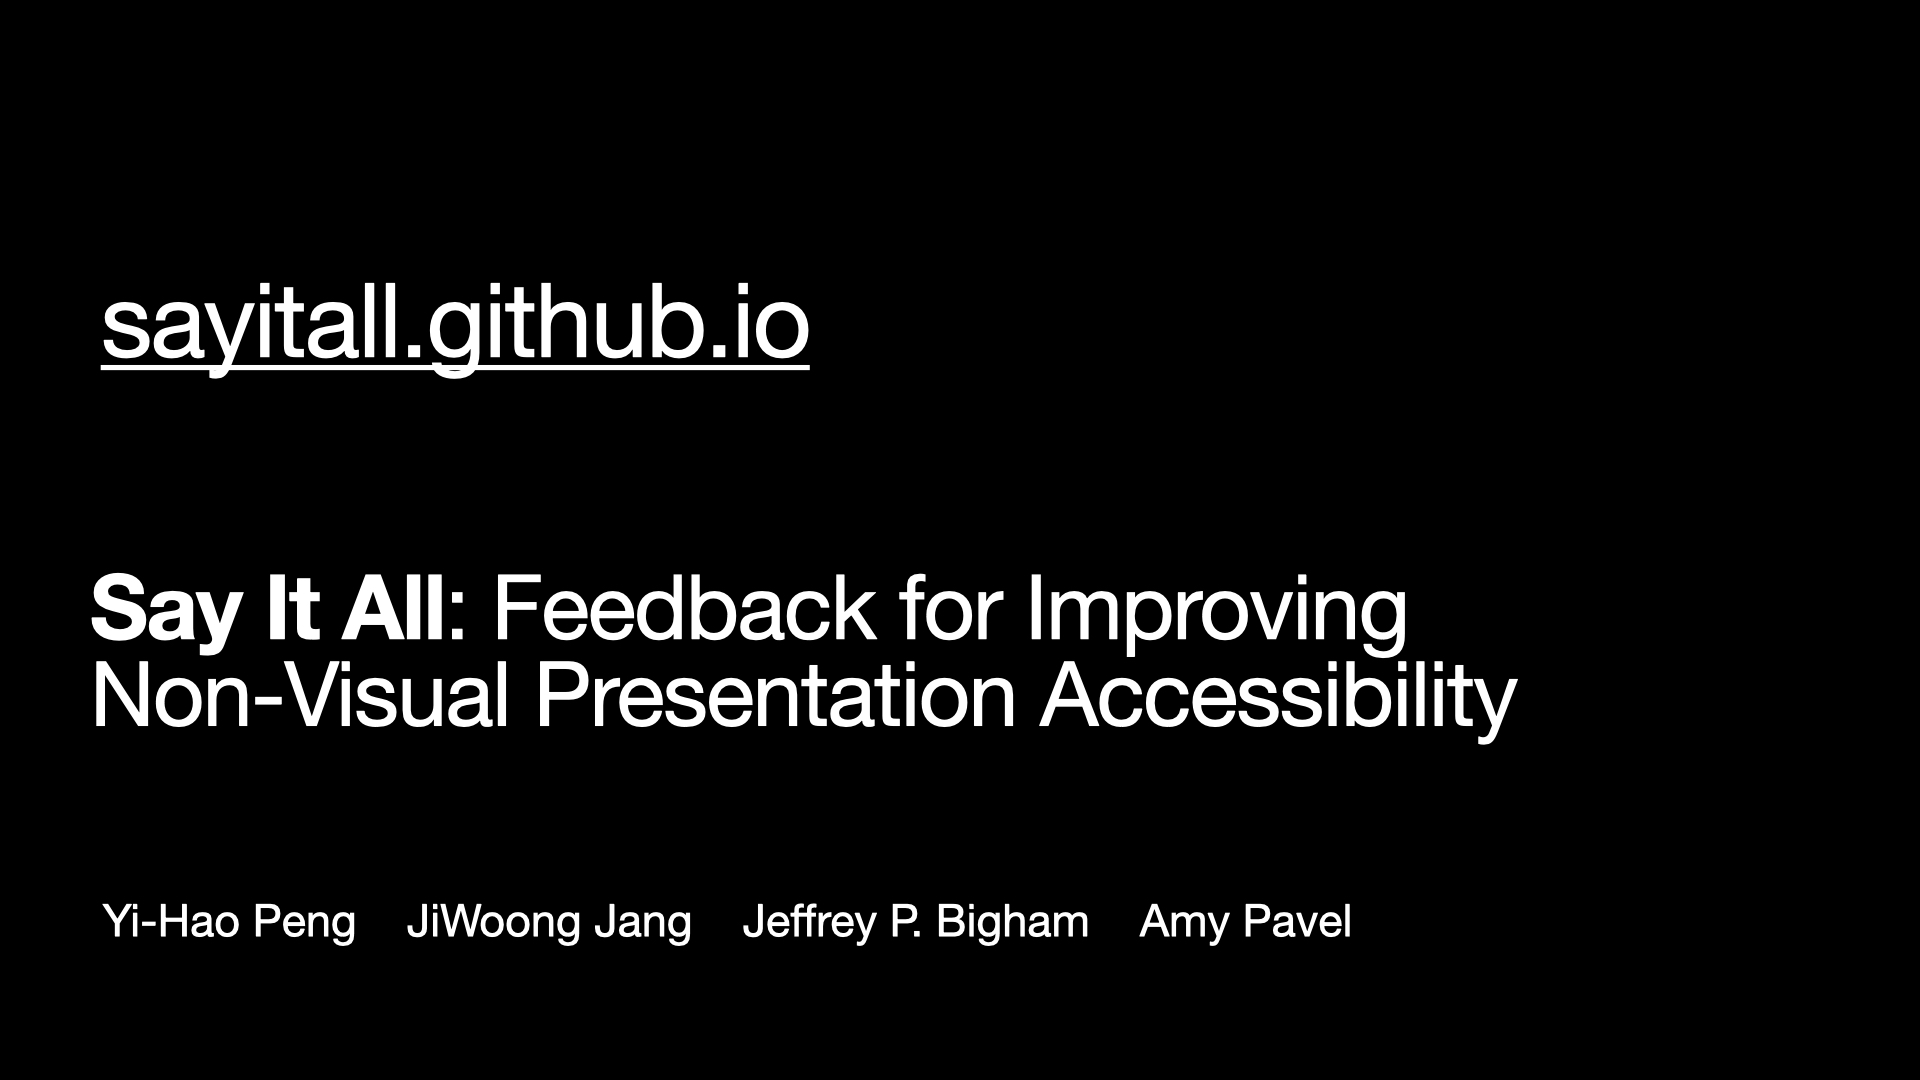 This is the last slide. Three text blocks placed from the top to the bottom with left alignment. The first text block is “sayitall.github.io”. The second text block is “Say It All: Feedback for Improving Non-Visual Presentation Accessibility”, and the final text block contains names of all four authors including “Yi-Hao Peng”, “JiWoong Jang”, “Jeffrey P. Bigham” and “Amy Pavel”.